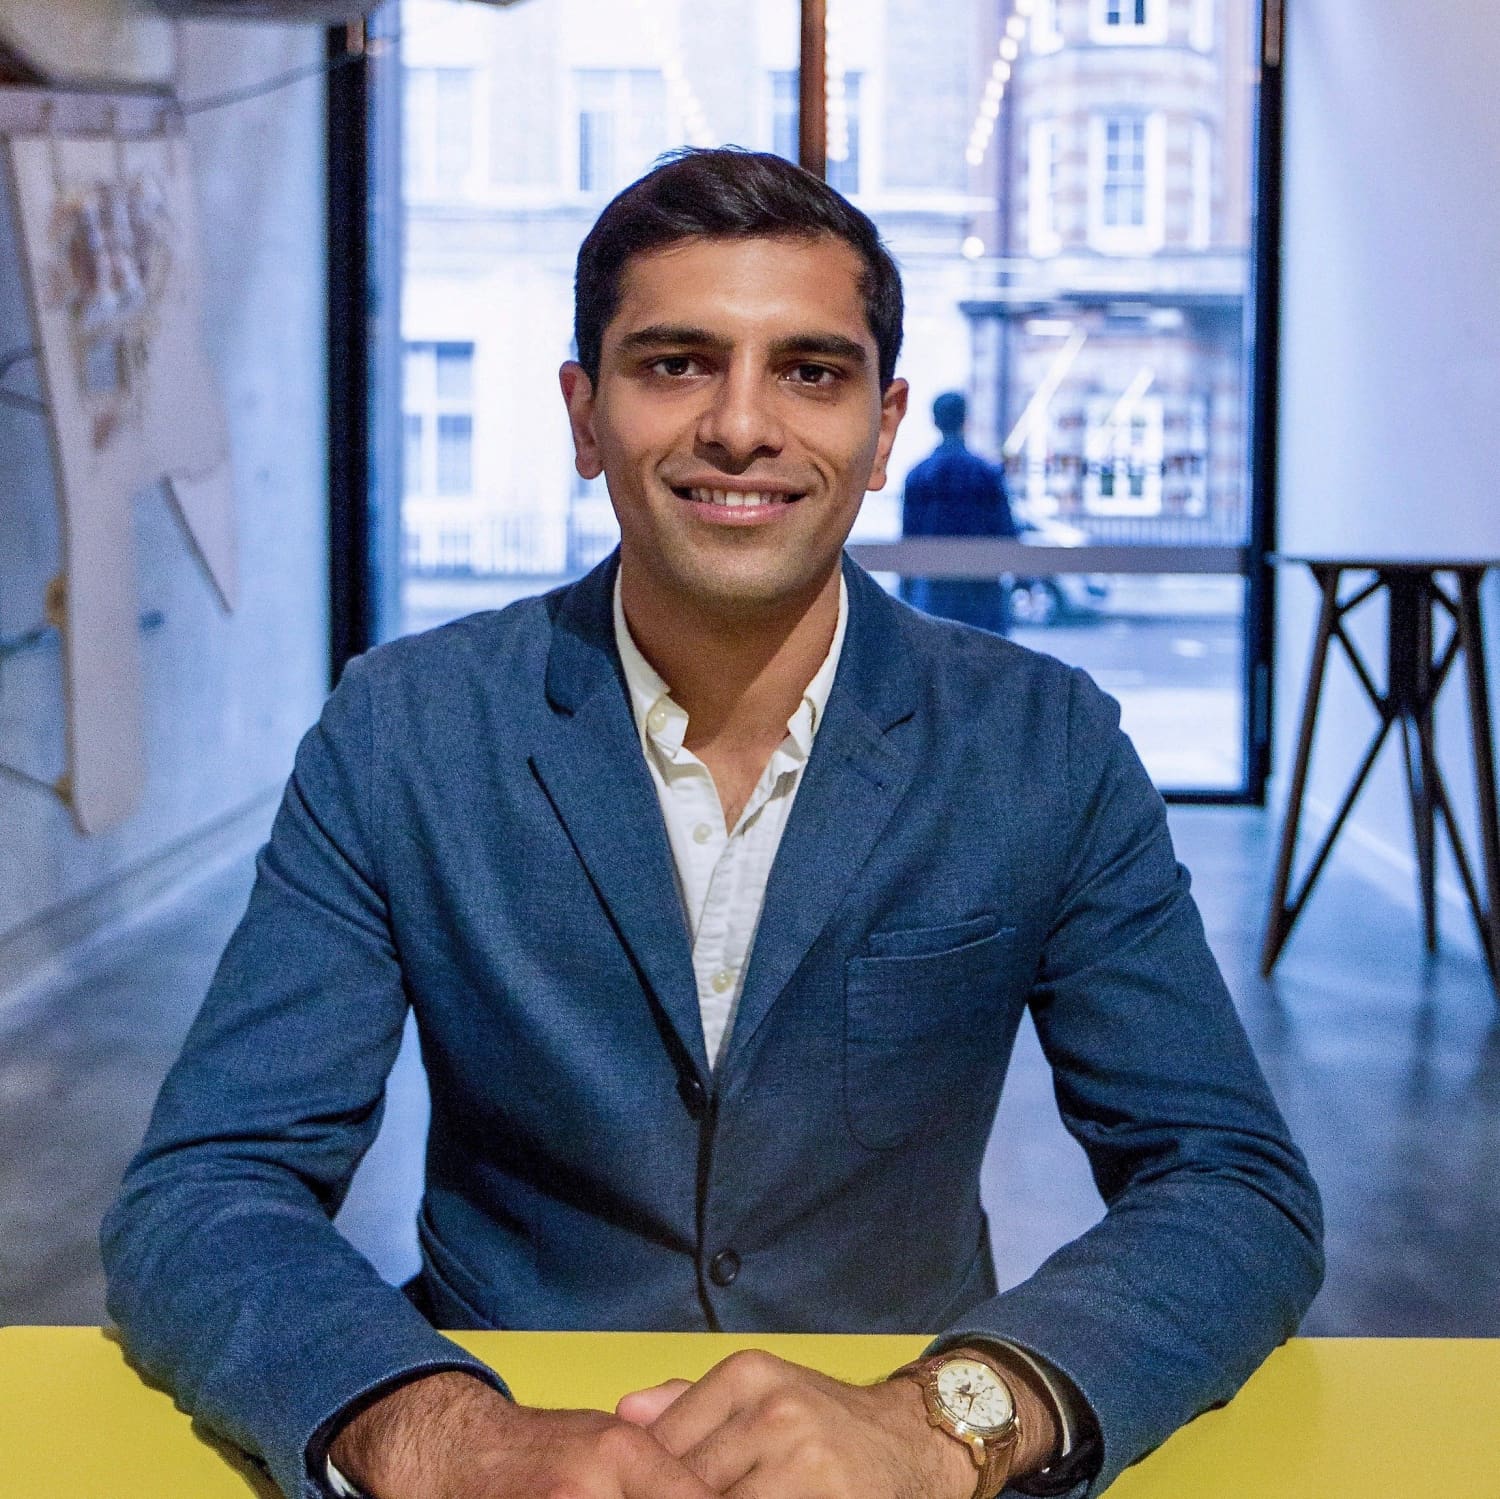 Interview with Vishal Kumar, Data Science @The Bartlett, UCL